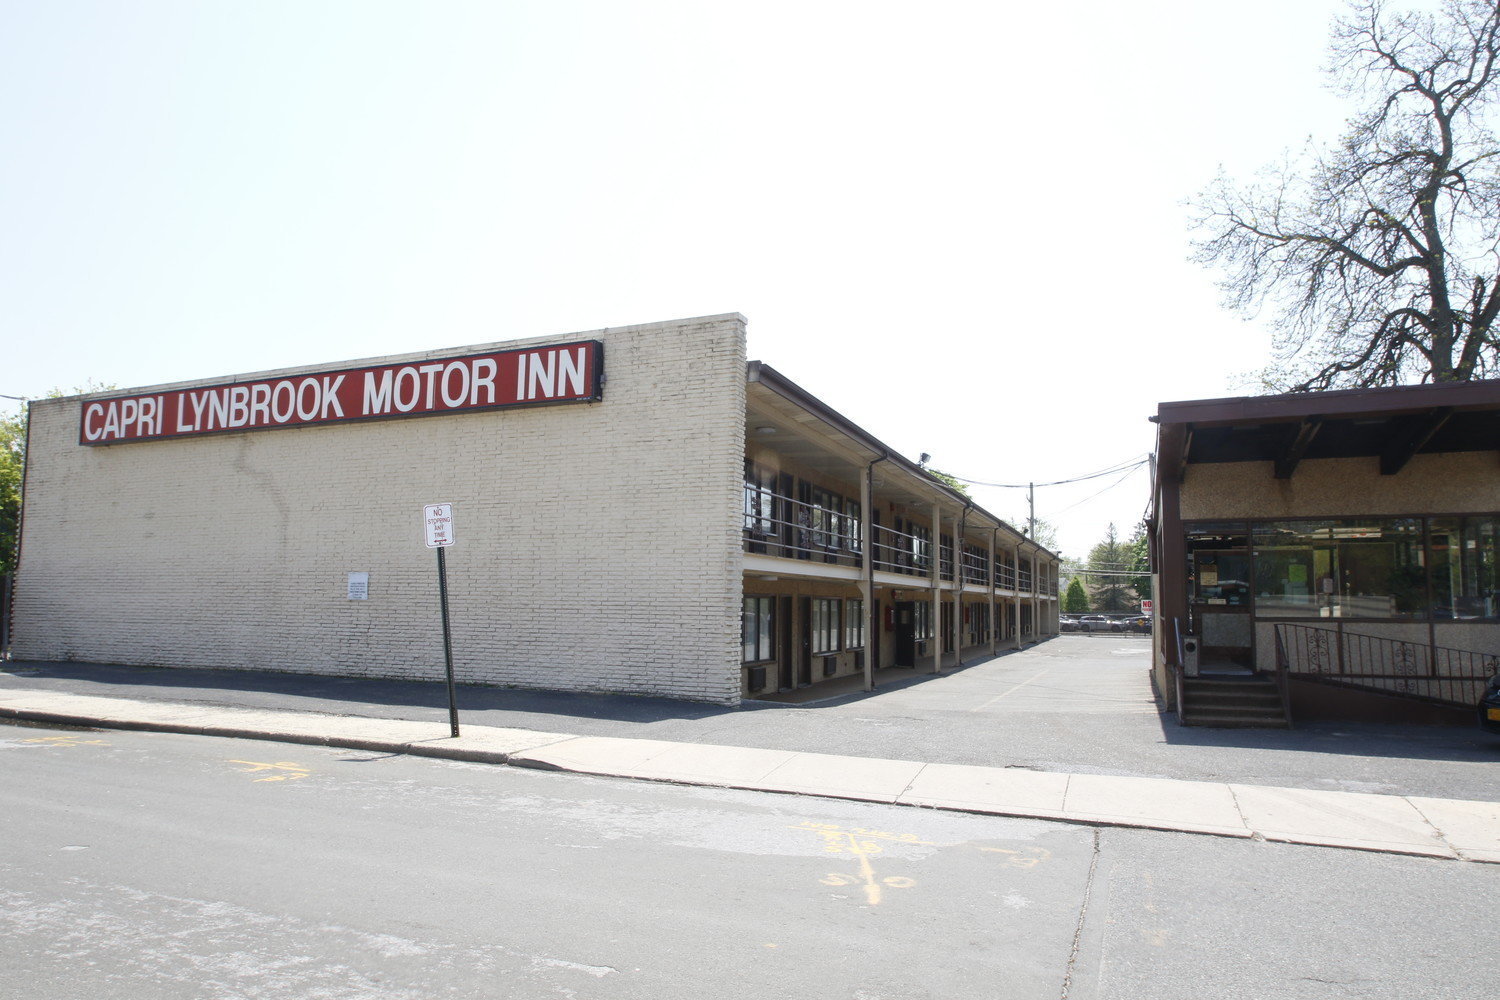 The Lynbrook Motor Inn, formerly the Capri, has for years been a neighborhood nuisance, according to village officials.